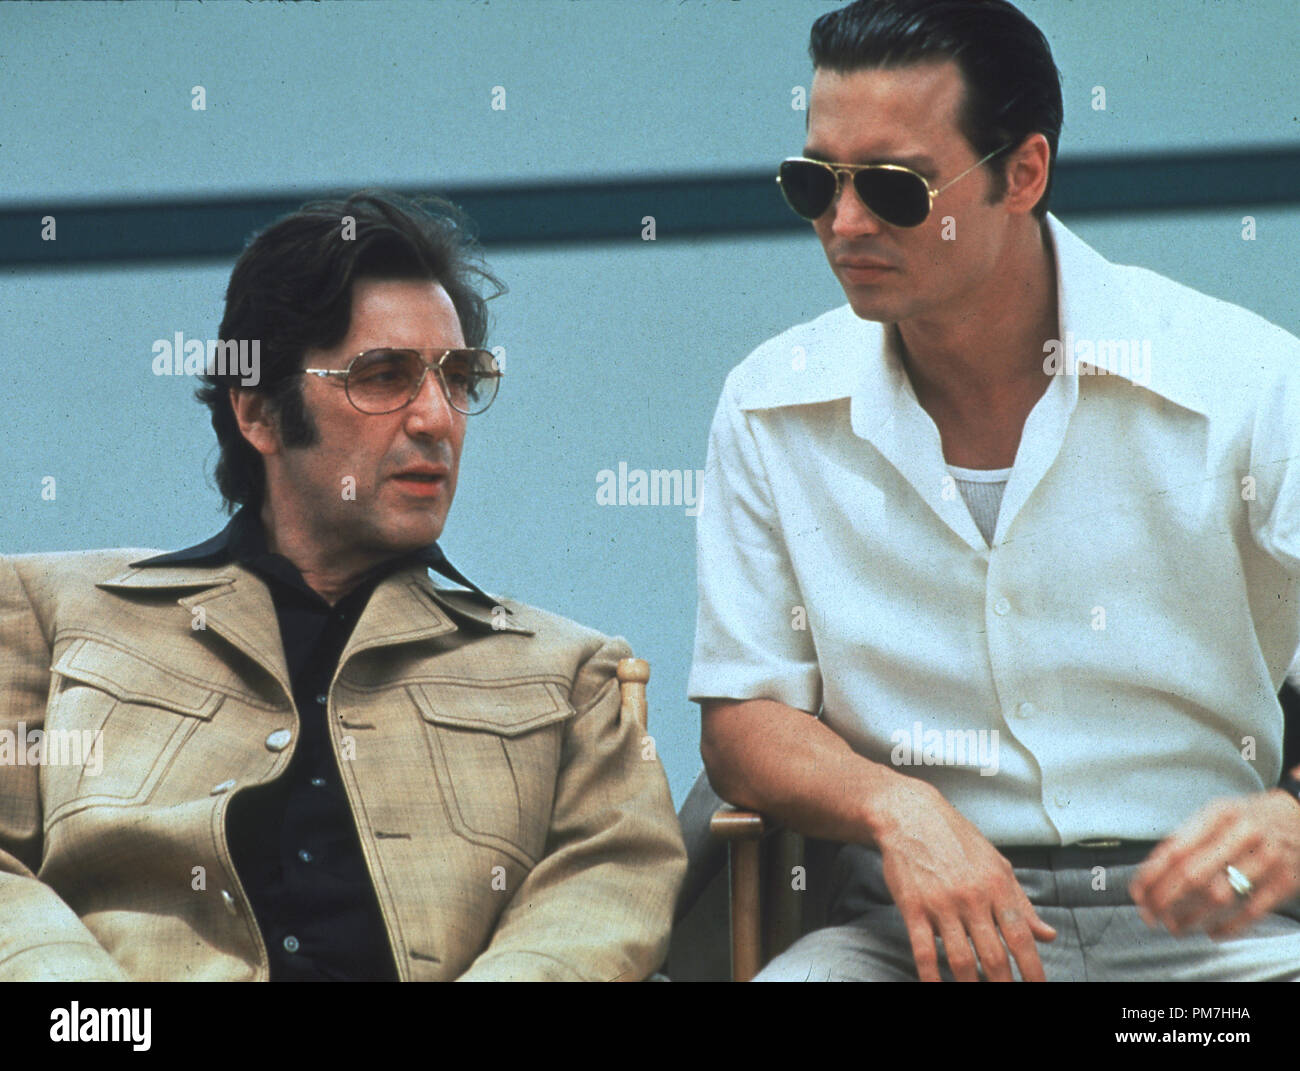 Film Still from 'Donnie Brasco' Al Pacino, Johnny Depp © 1997 Tri Star  File Reference # 31013368THA  For Editorial Use Only - All Rights Reserved Stock Photo